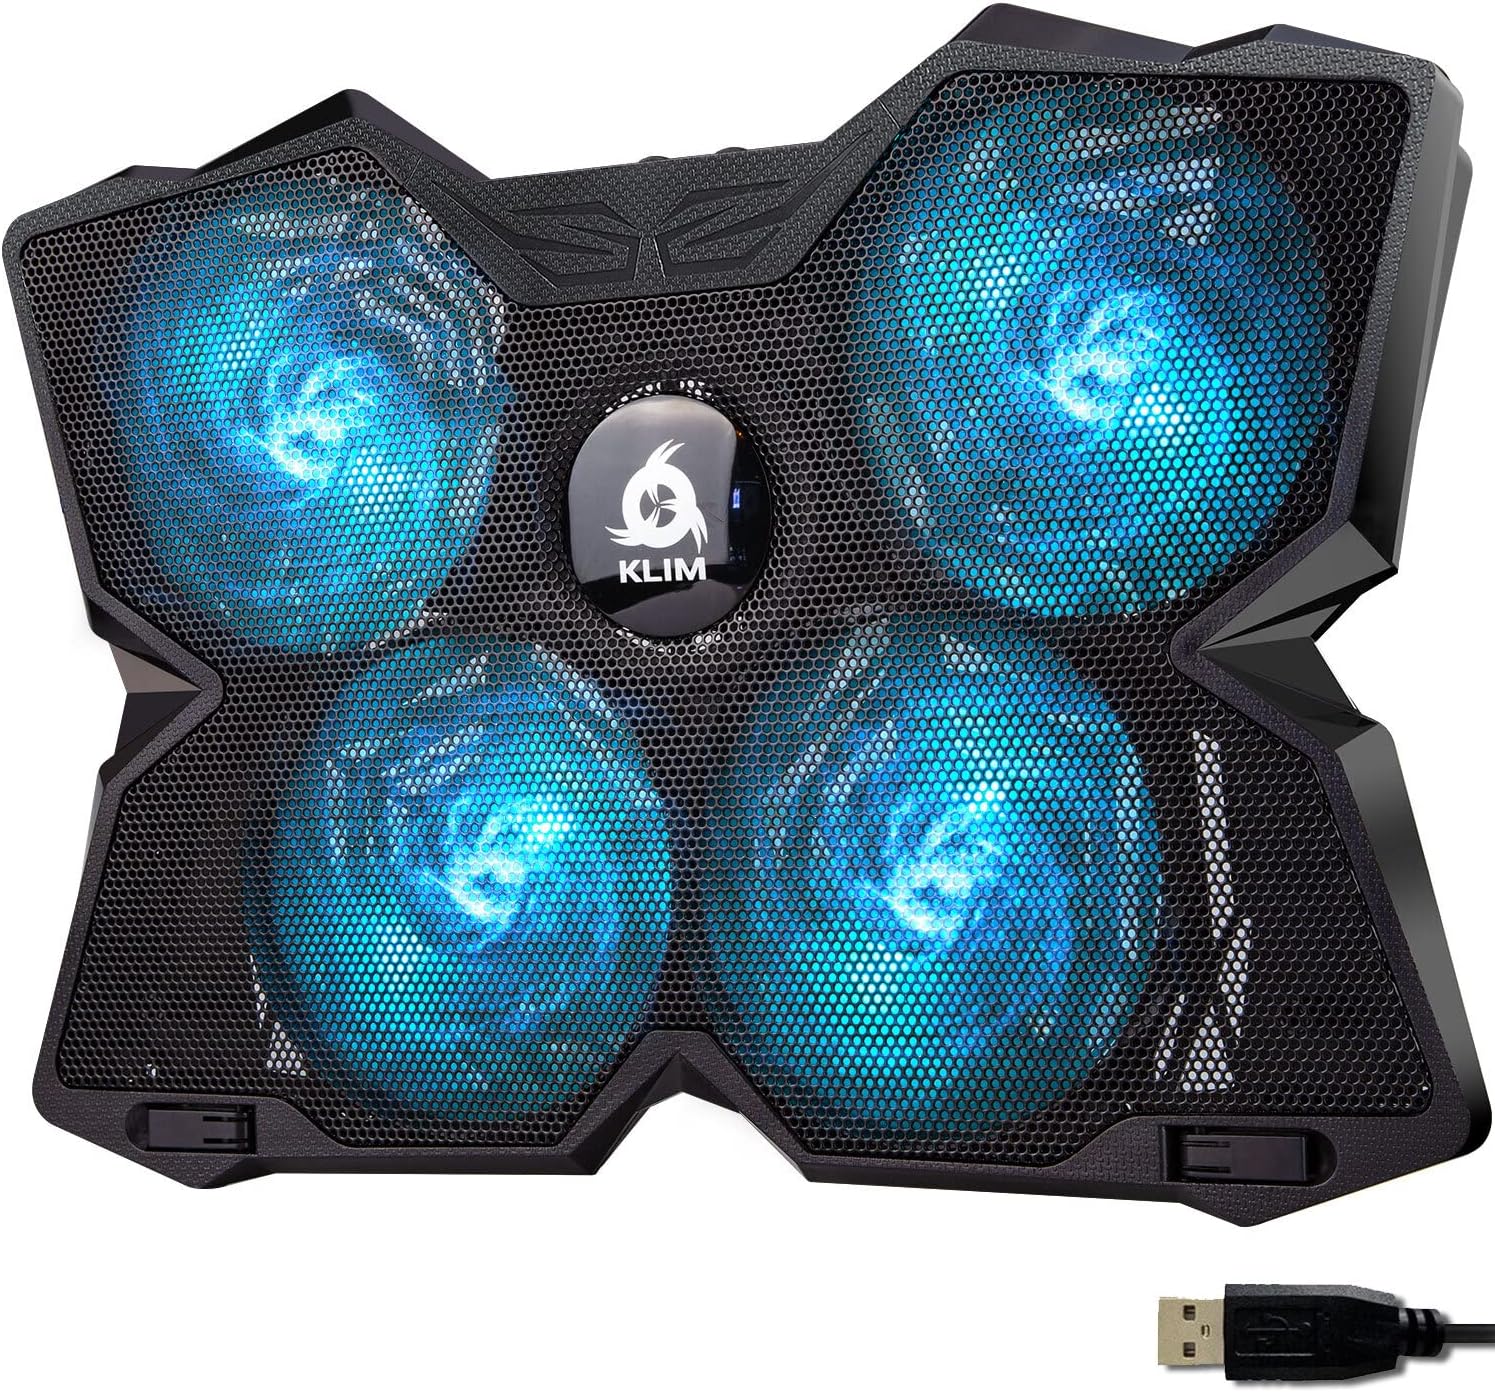 KLIM Wind Laptop Cooling Pad - More than 500 000 units sold - New Version 2024 - The Most Powerful Rapid Action Cooling Fan - Laptop Stand with 4 Cooling Fans at 1200 RPM - USB Fan - PS5 PS4 - Cyan